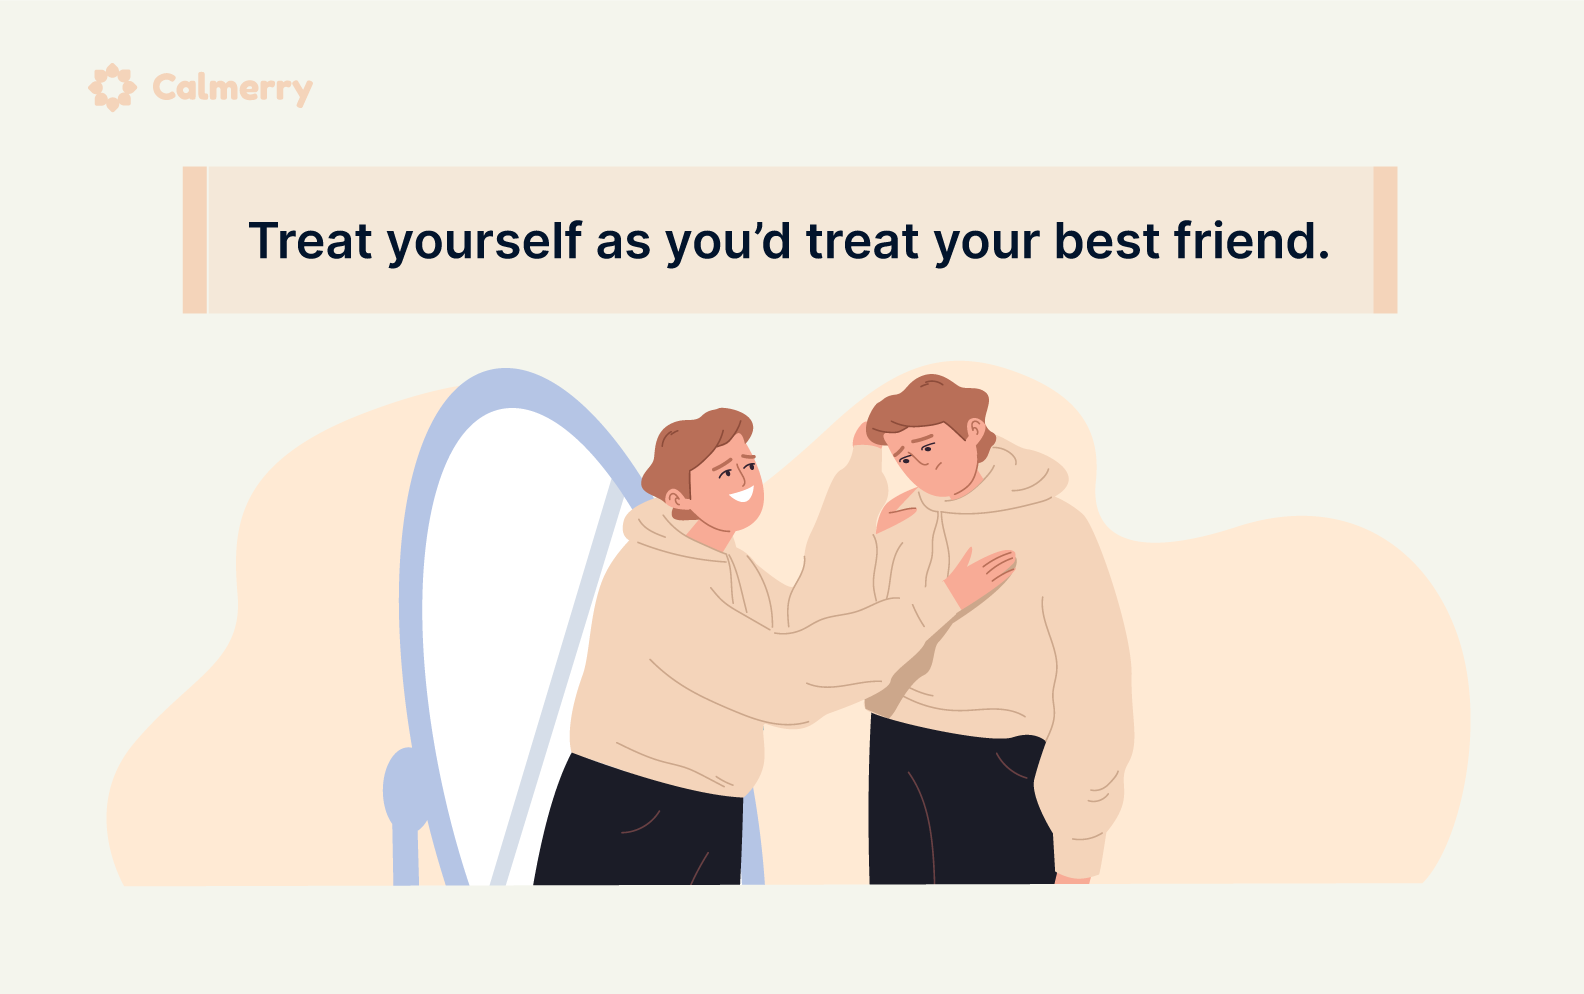 Treat yourself as you’d treat your best friend